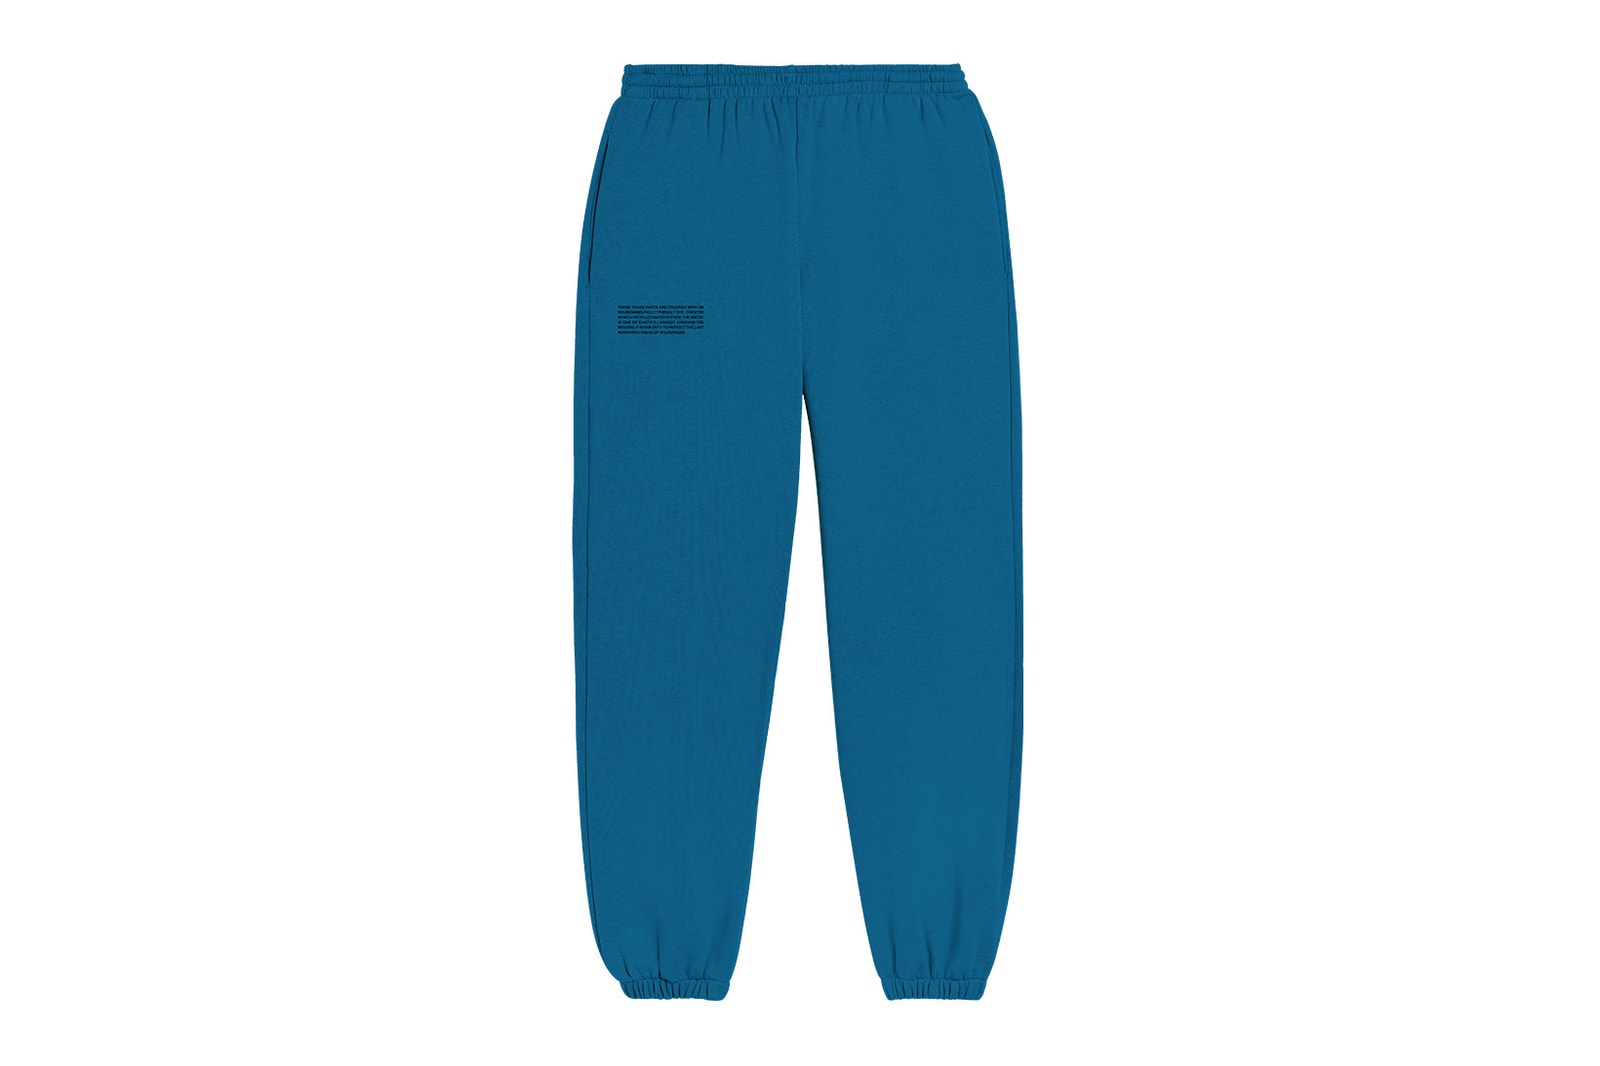 pangaia arctic collection hoodies blue sustainable eco-friendly sweatshirts pants loungewear price release 